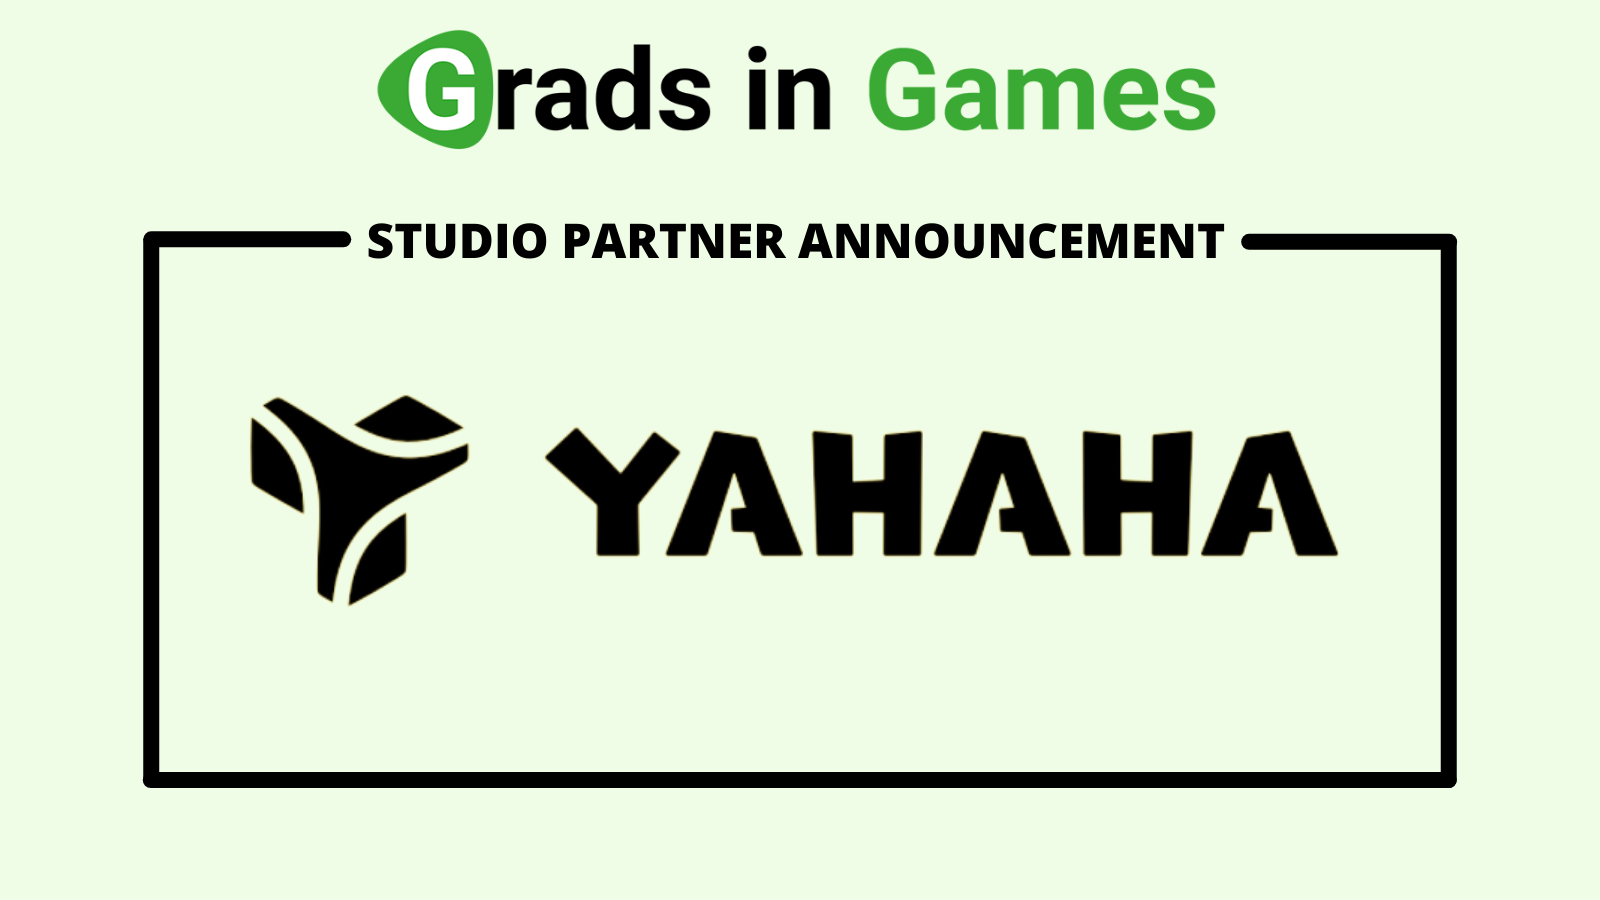 Grads In Games welcomes Yahaha as a studio partner for 2021/22